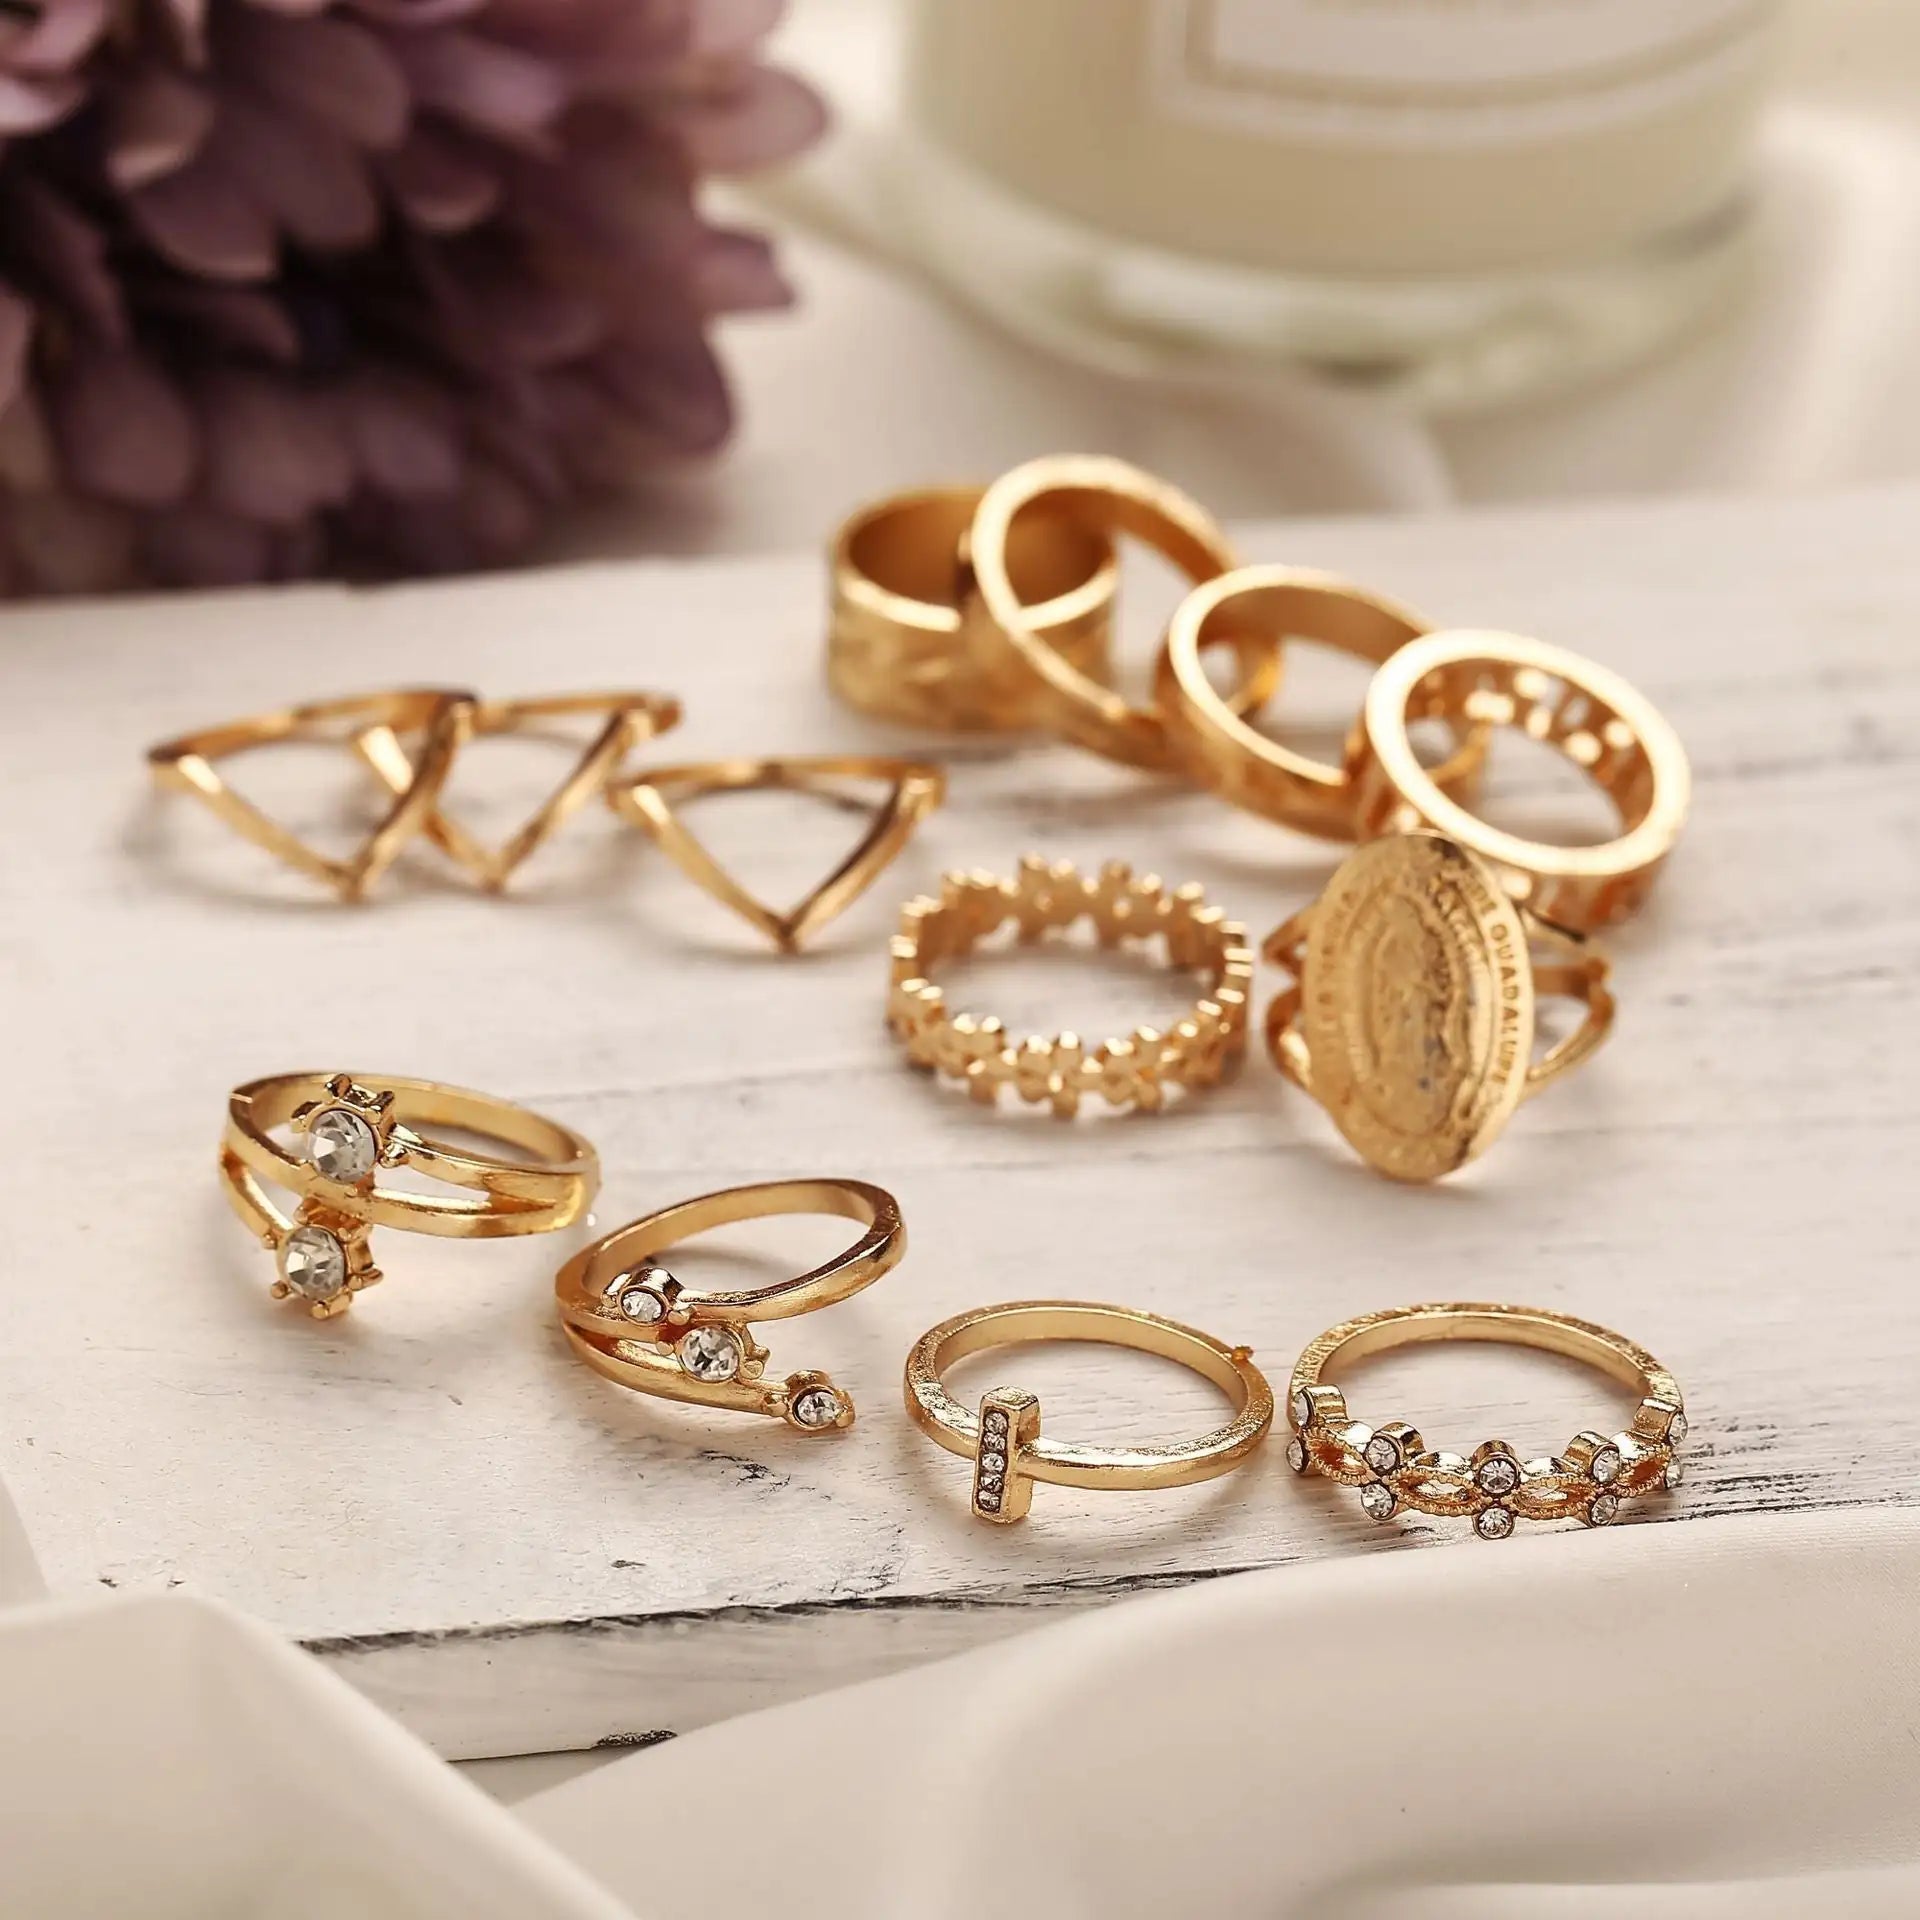 13 Piece Medallion Ring Set - A&S Direct